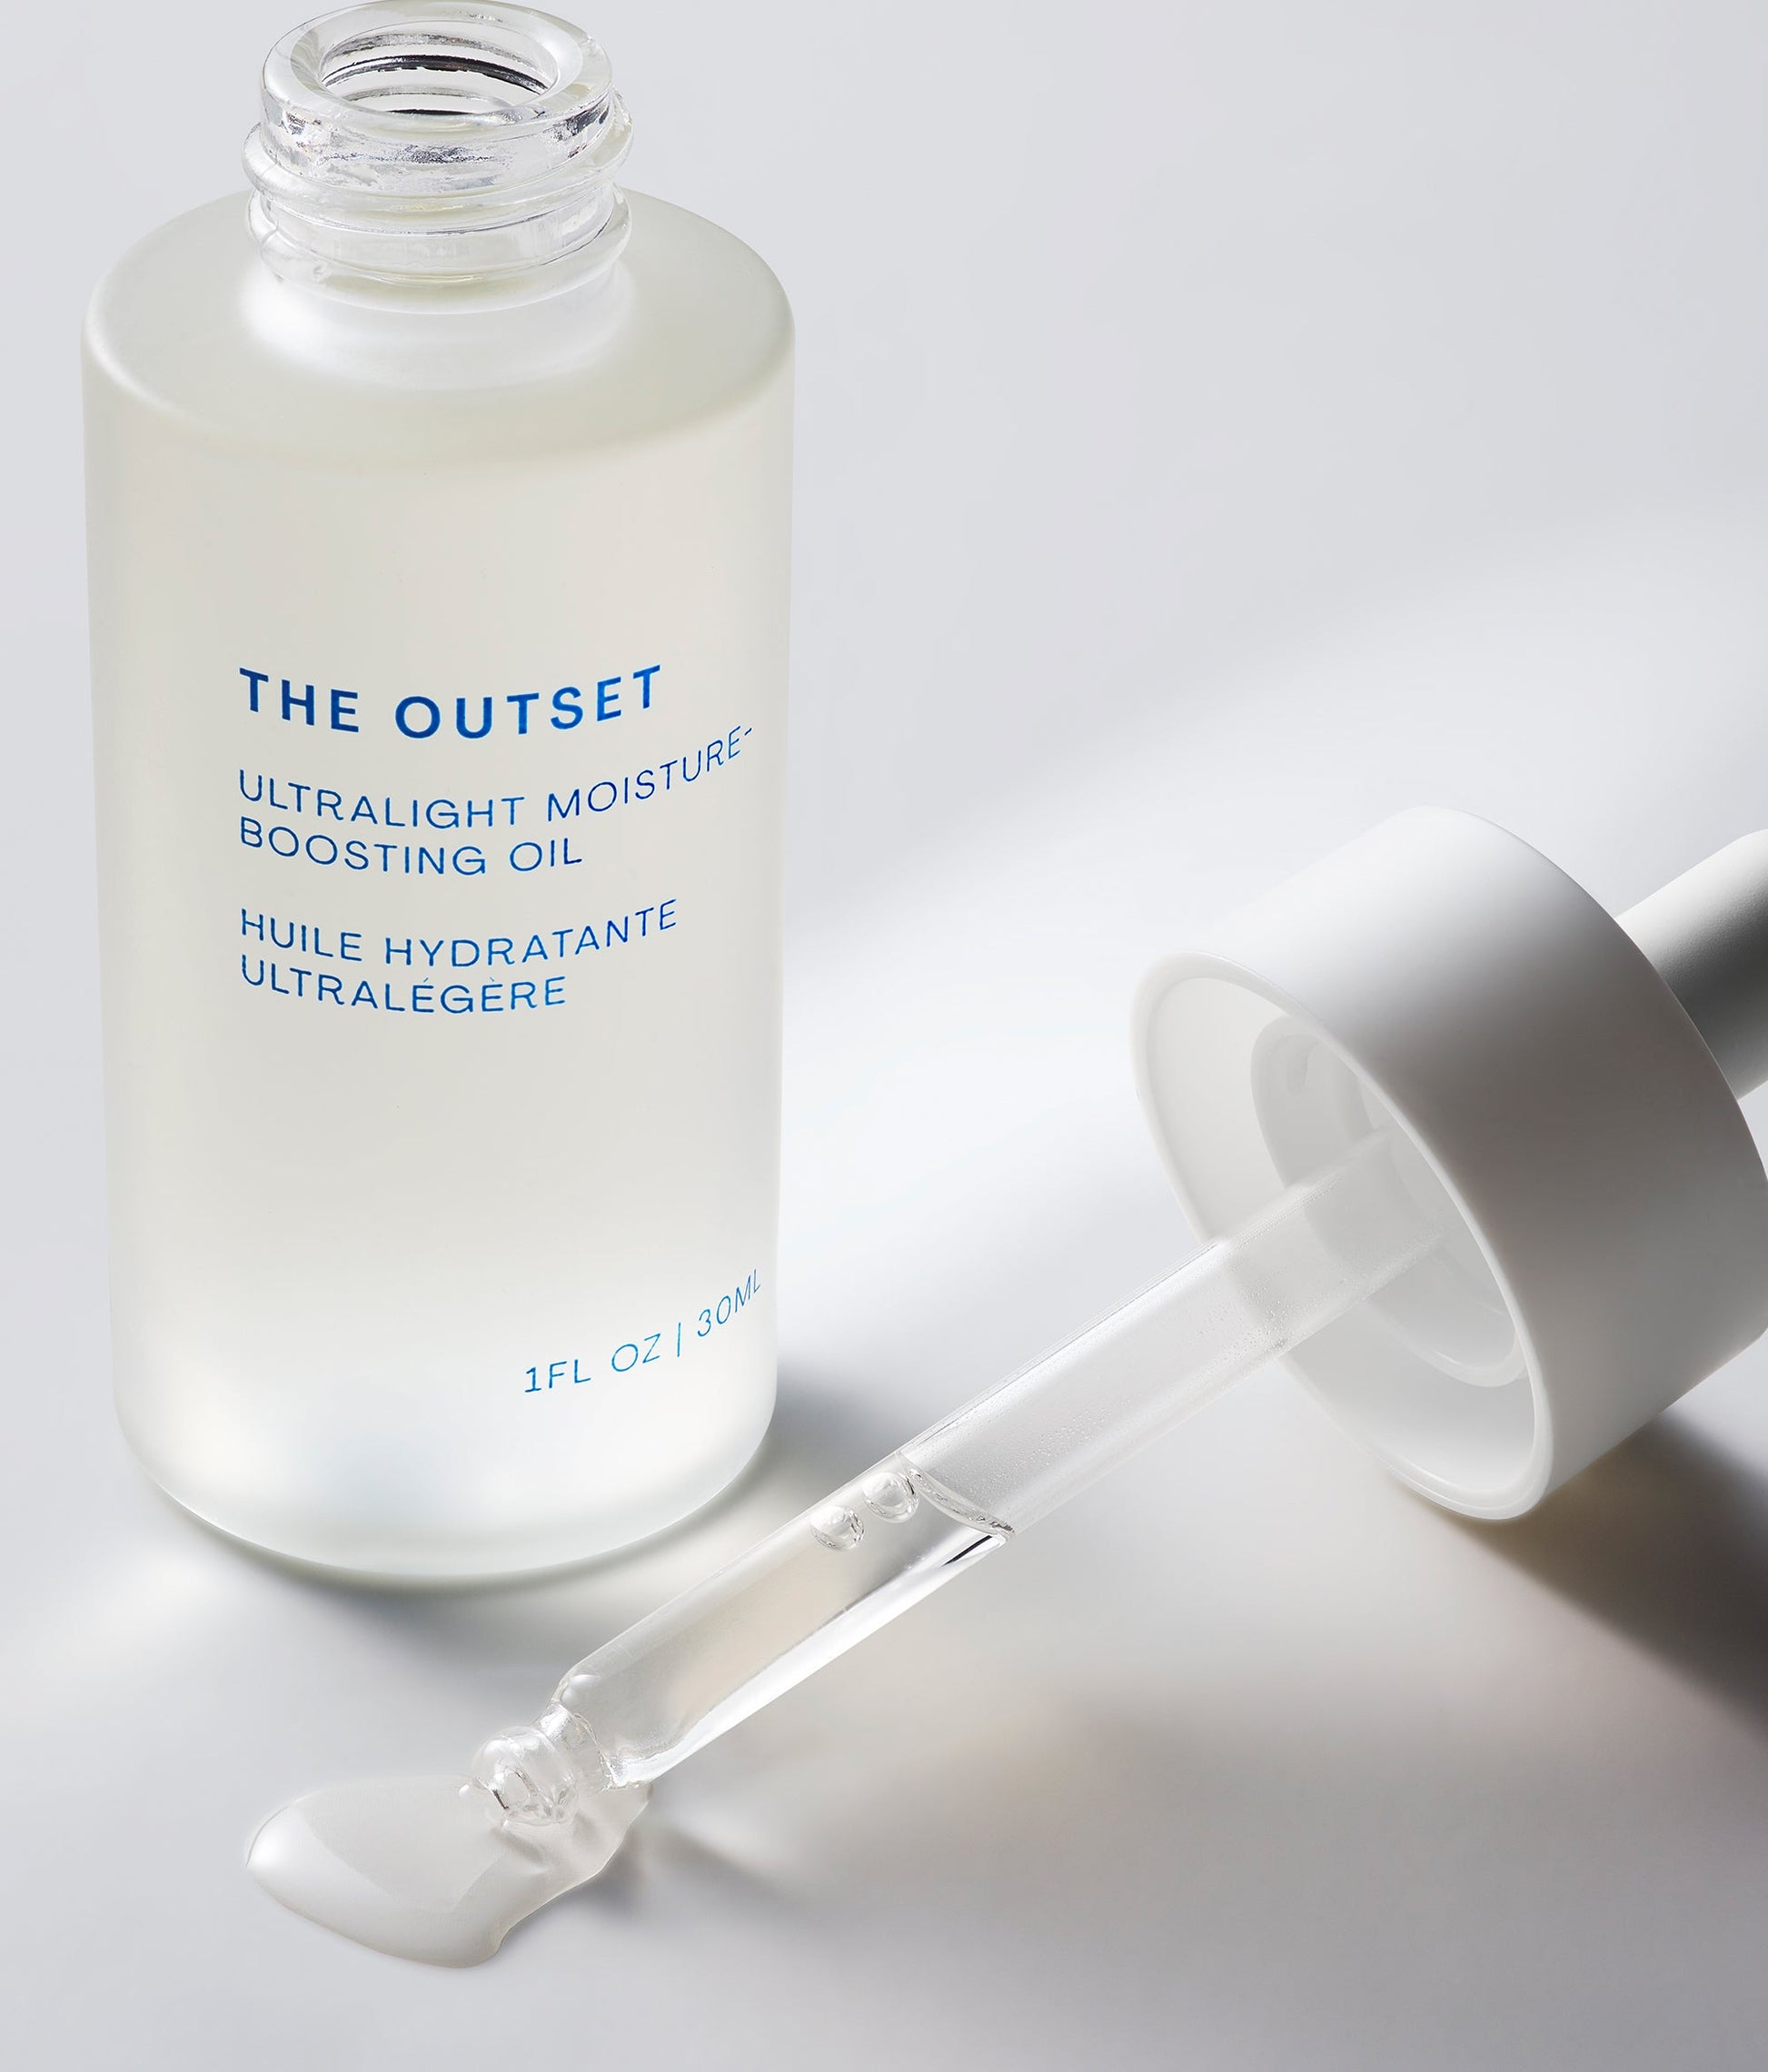 Photo of The Outset's ultralight moisture-boosting oil with dropper and texture